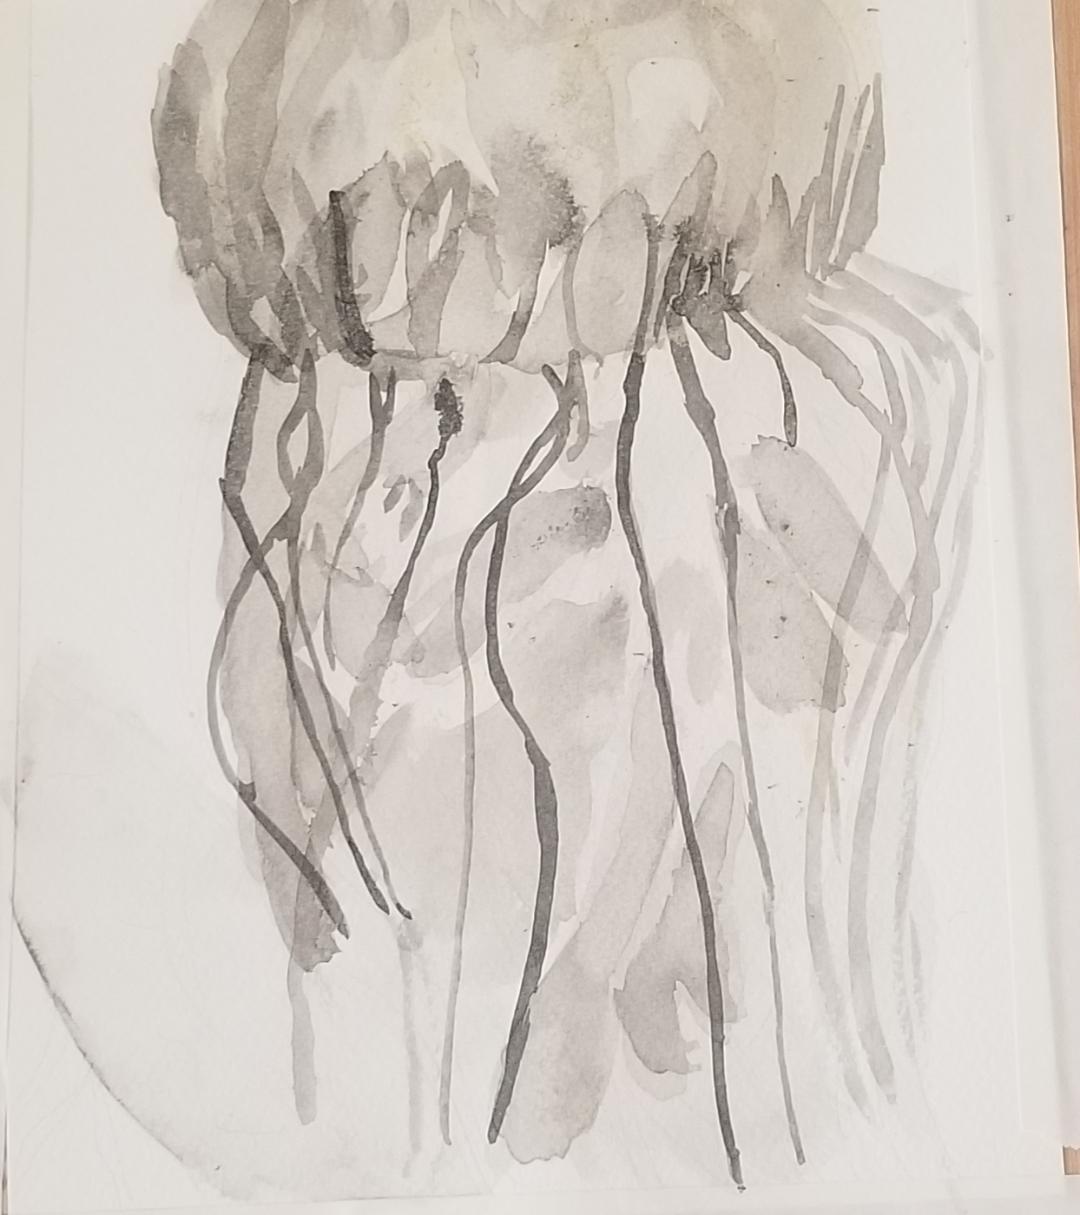 Jellyfish In India Ink - BRING OUT YOUR CREATIVITY